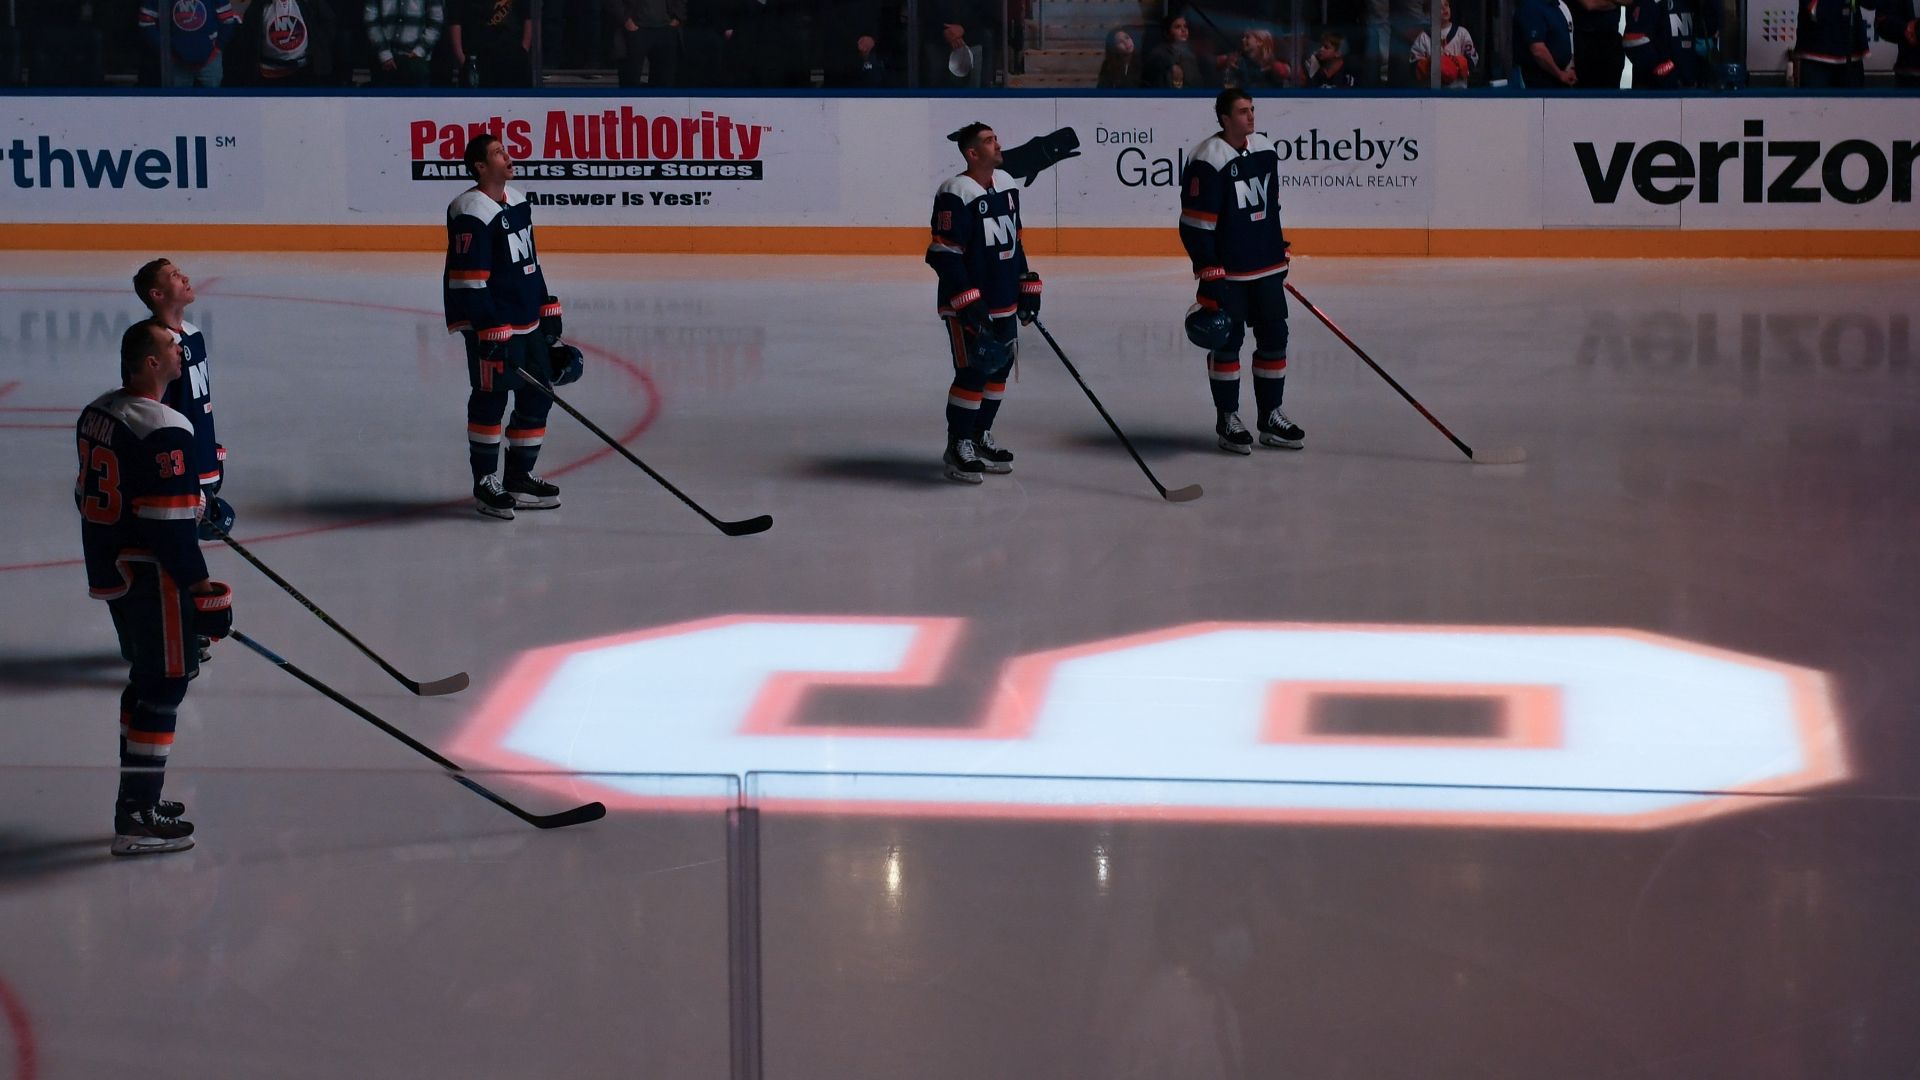 Islanders honor Clark Gillies before game, will wear No. 9 patches for rest  of season - Newsday